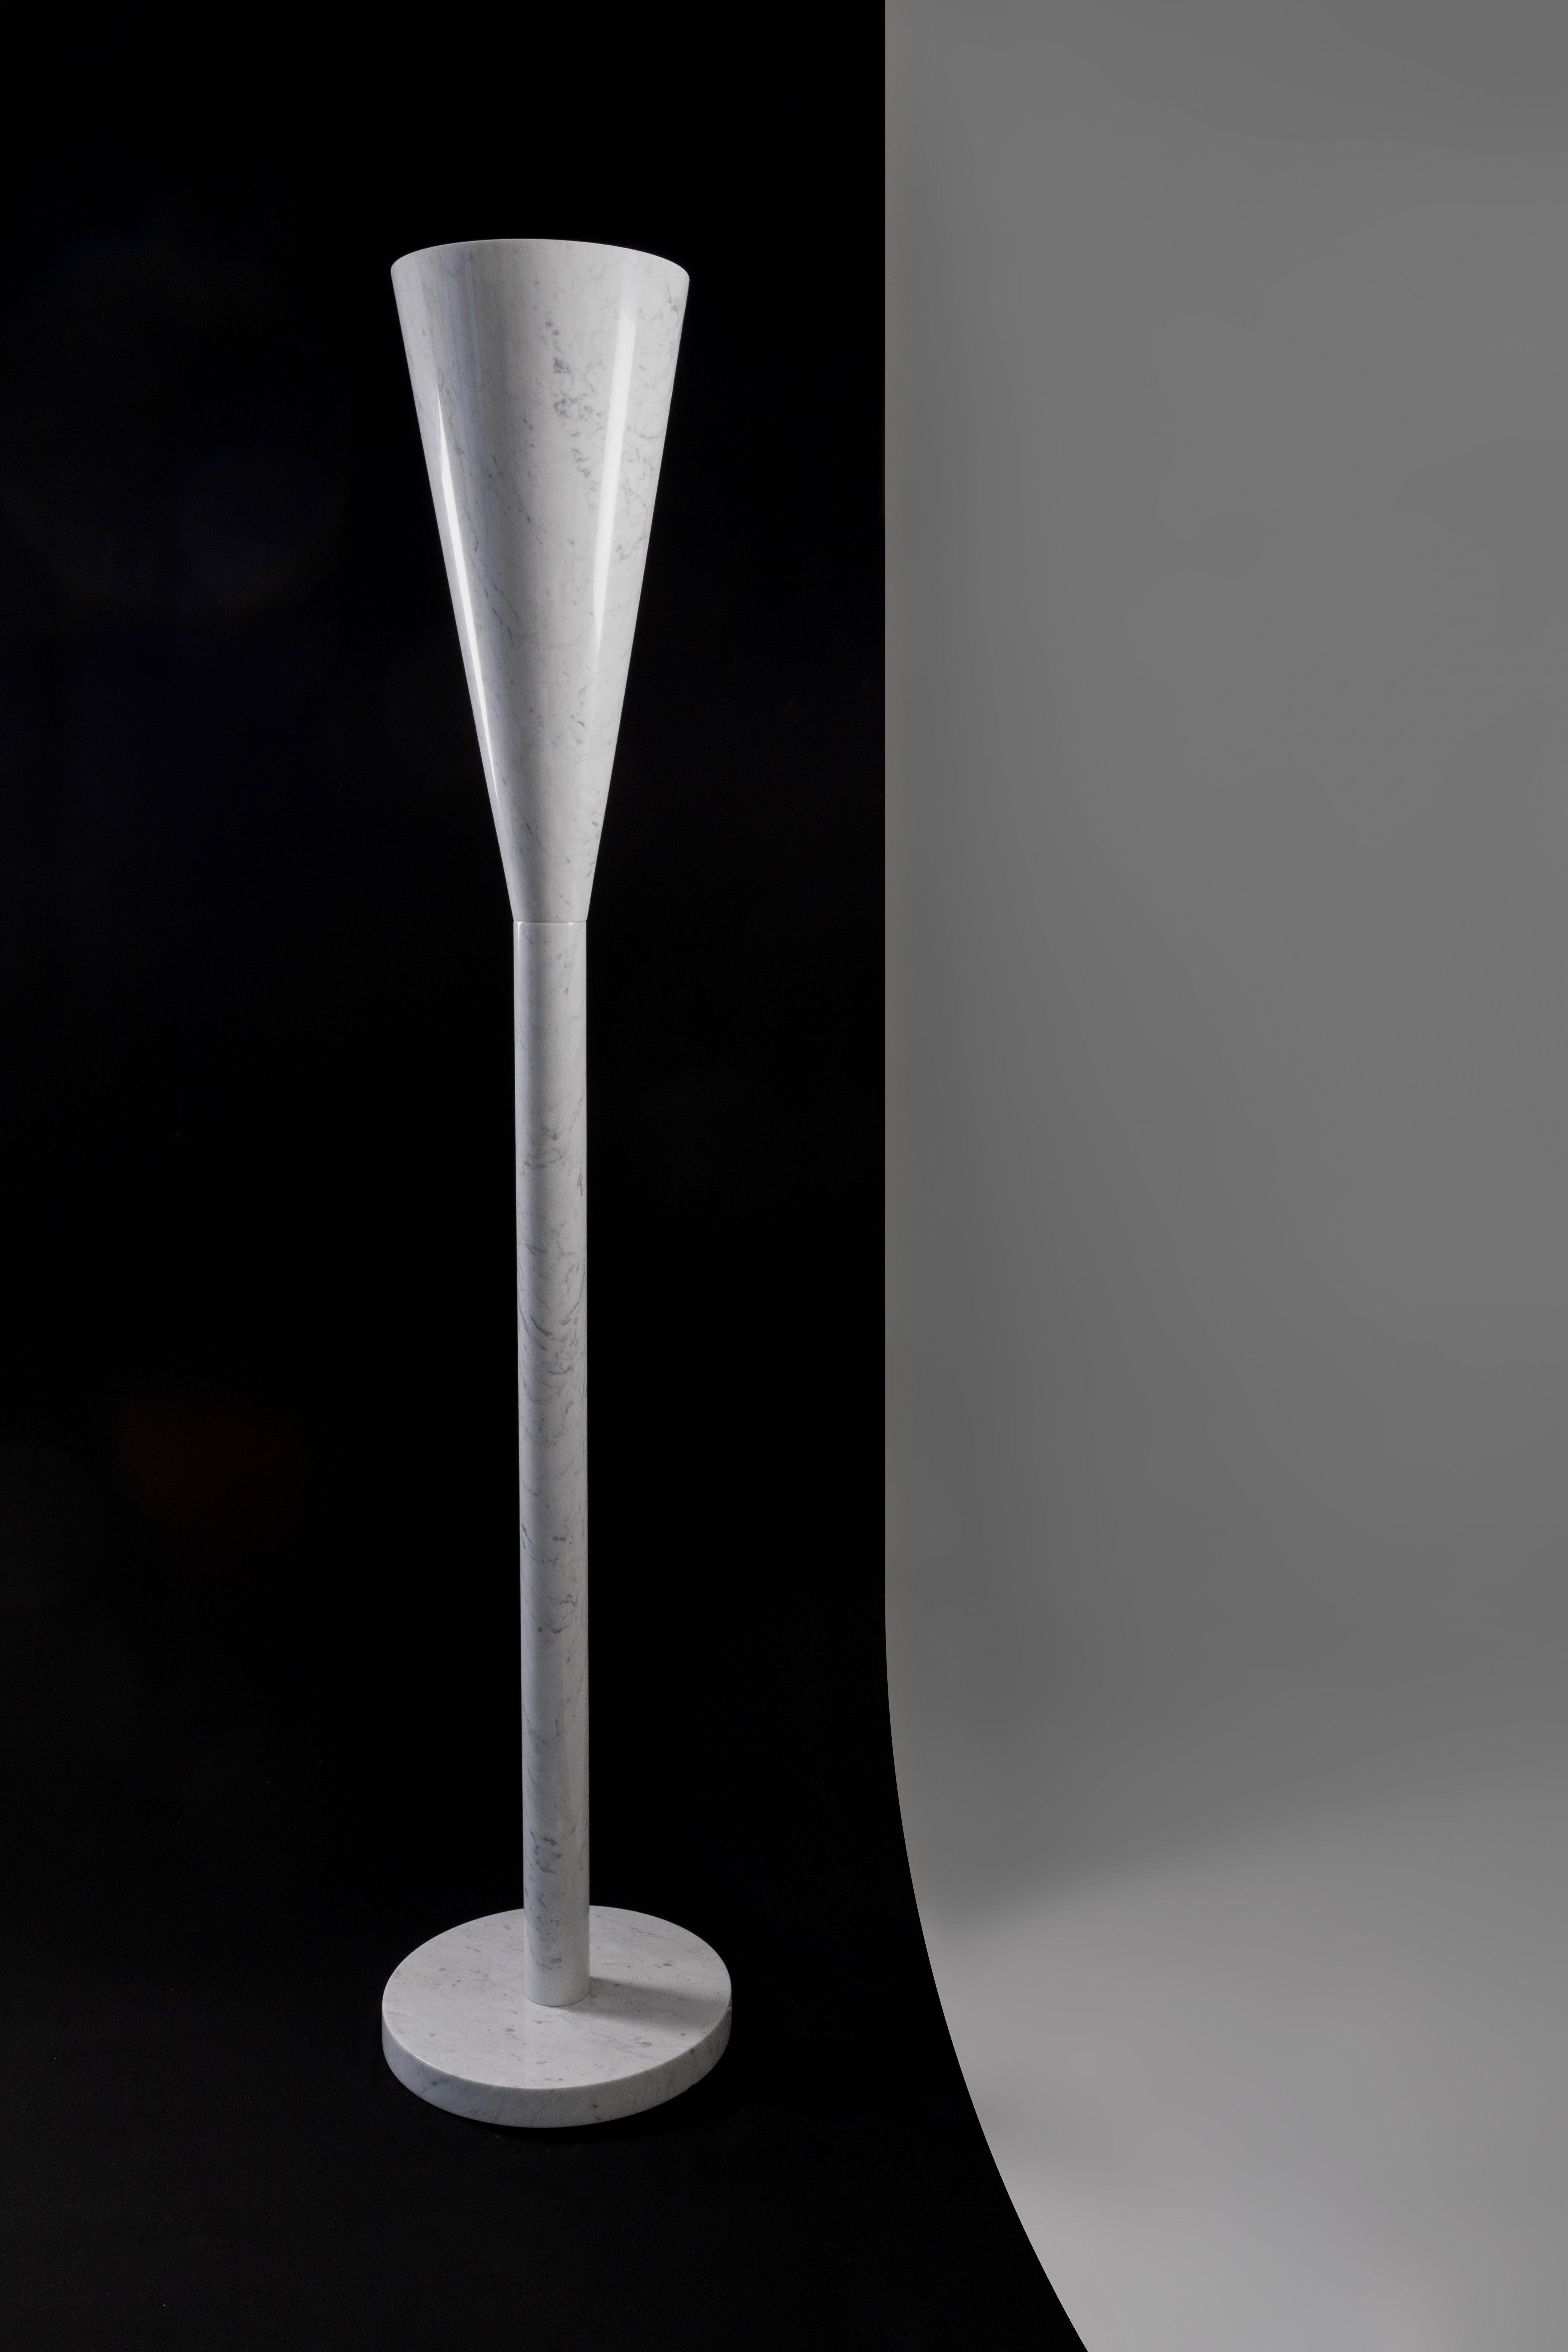 Floor lamp, made entirely of white Carrara marble, special and limited edition, only 5 pieces in the world.
Created by sculptor Teo Martino for the Entropia Design gallery.
The lamp has a refined and elegant line, the sculptor wanted to reinterpret